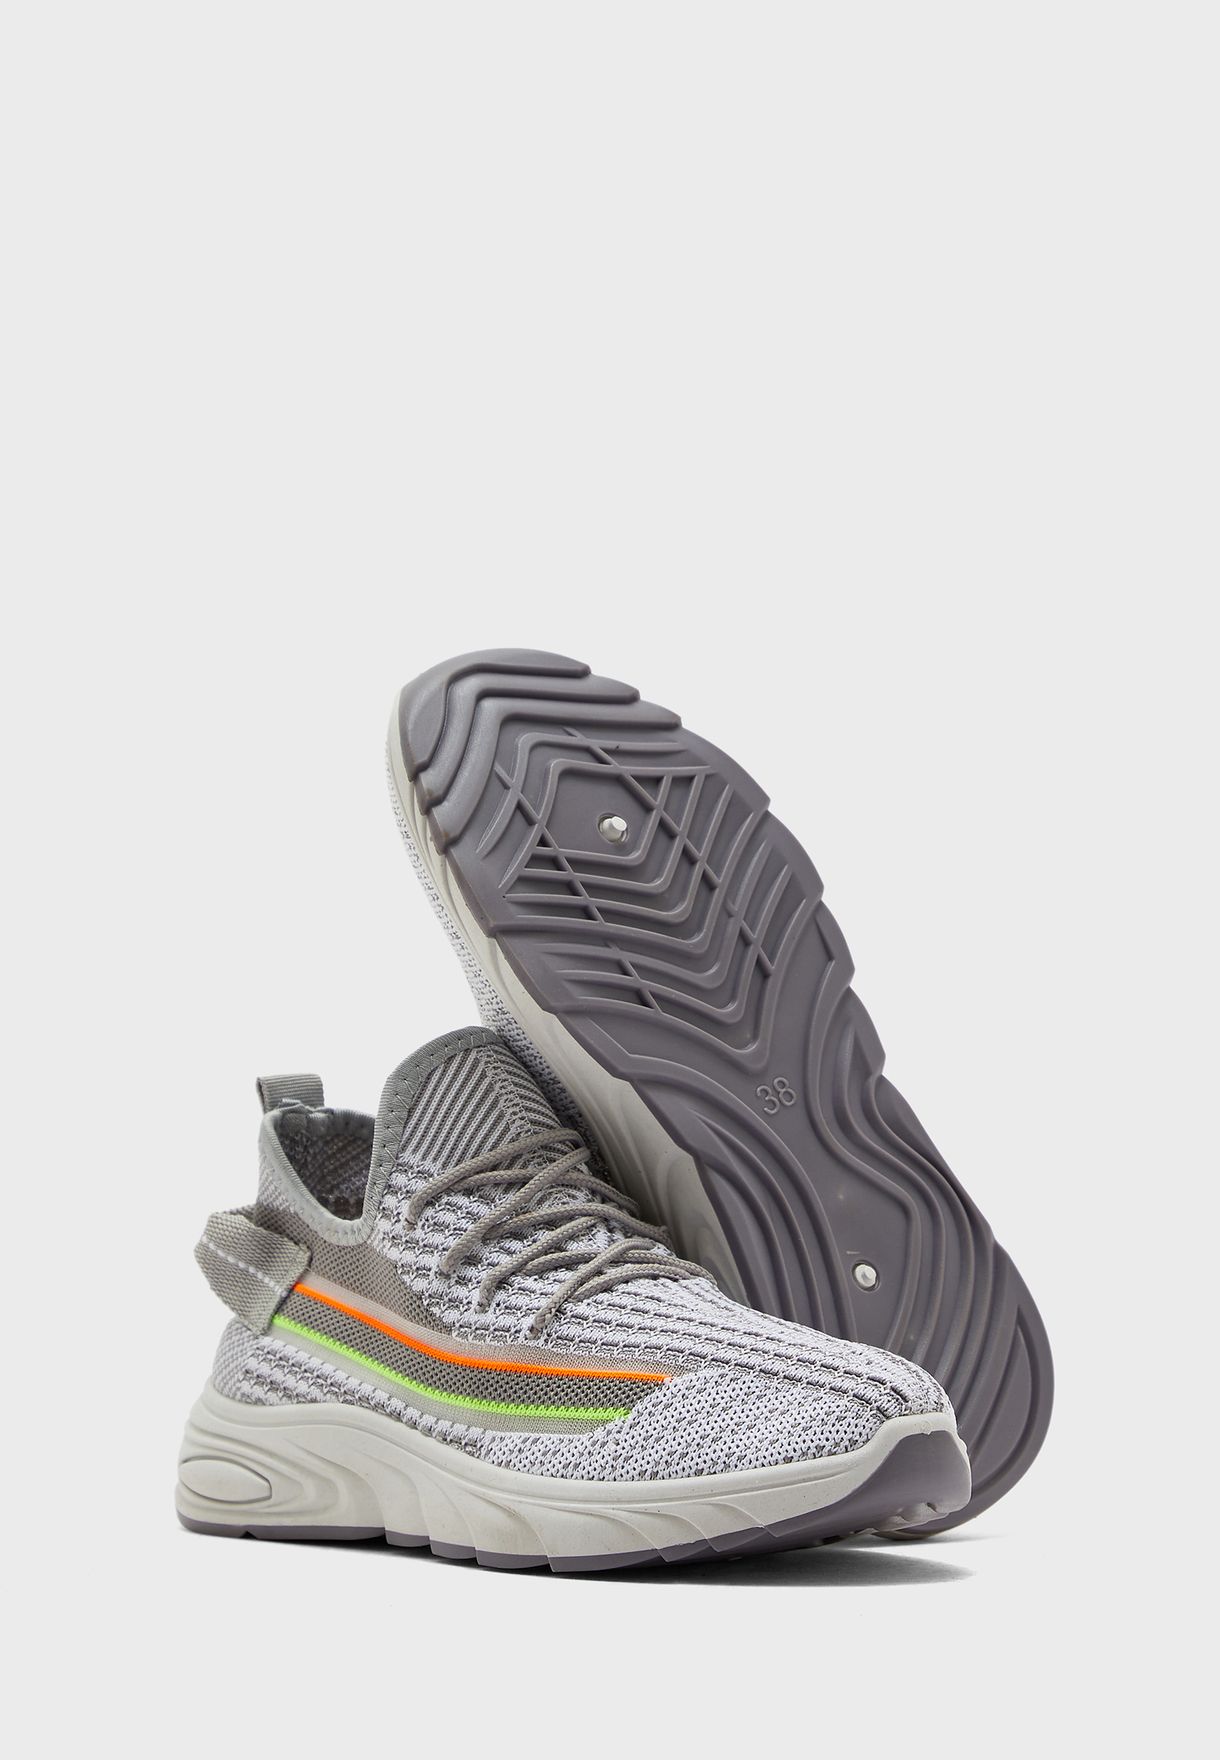 Rainbow Stripe Knit Lace Up Sneakers 